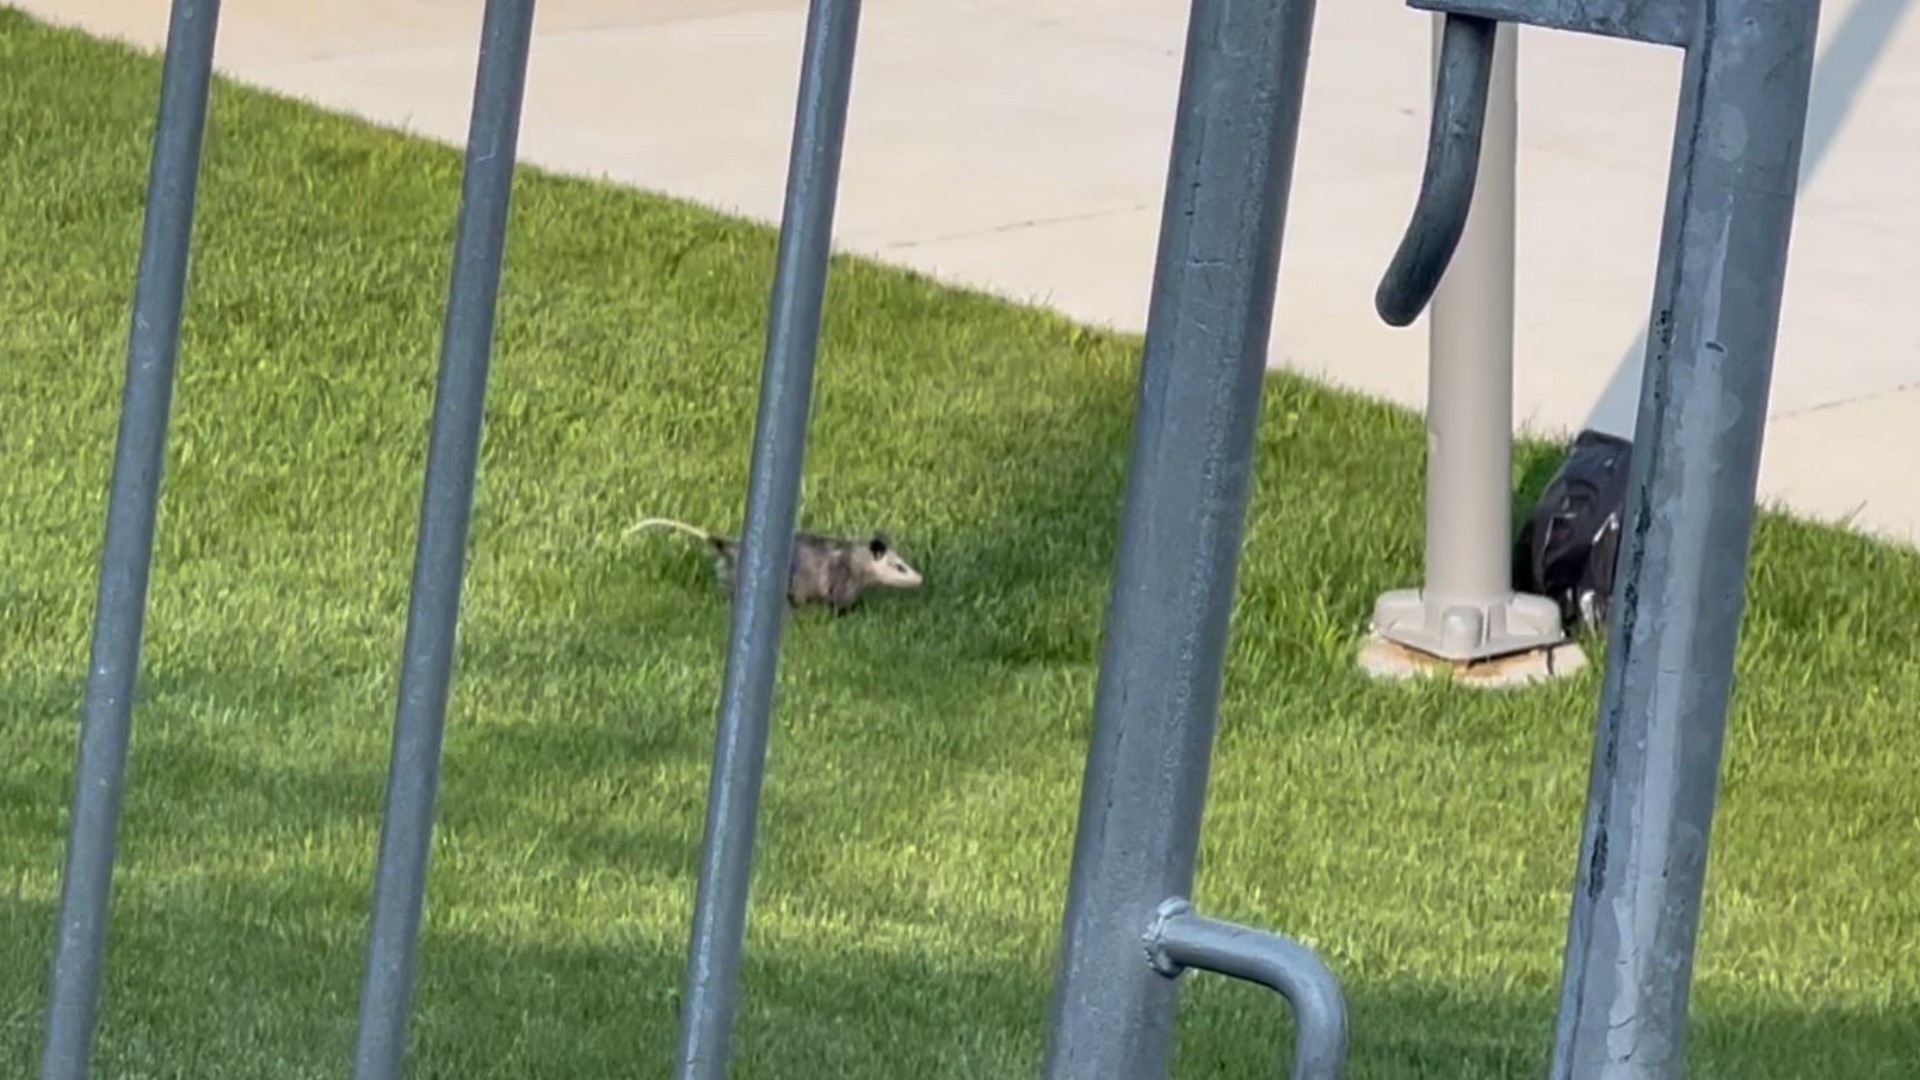 The possum was scurrying around Tom Benson Hall of Fame Stadium prior to the Browns-Jets game in Canton.